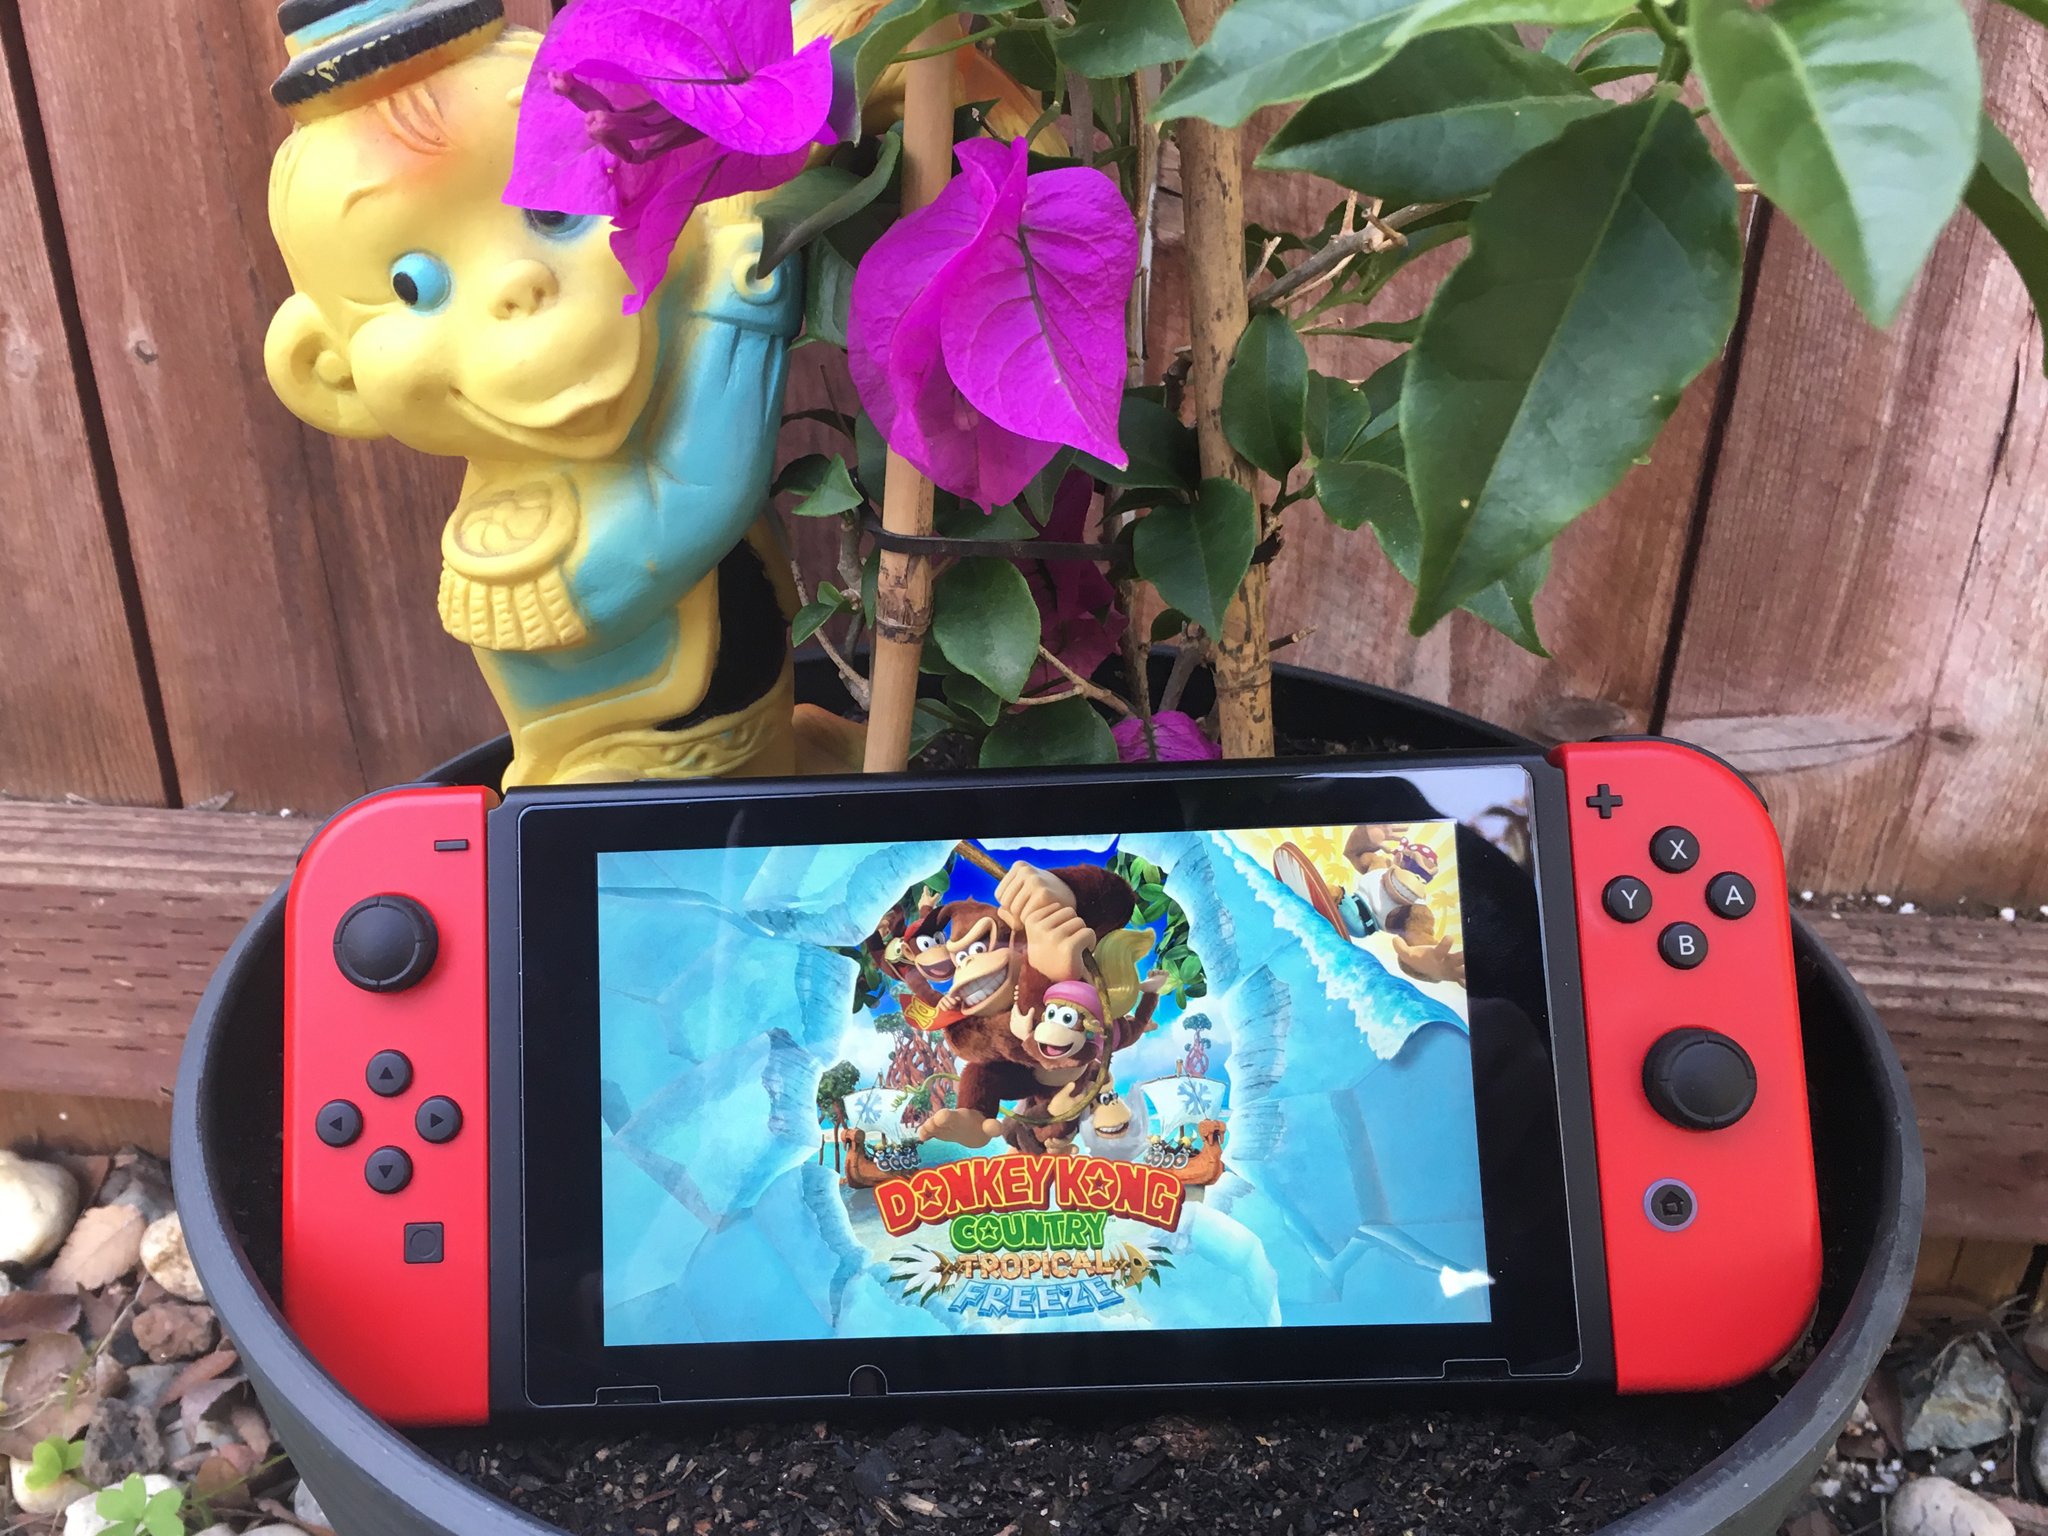 Donkey Kong Country: Tropical Freeze Nintendo Switch Lite Gameplay